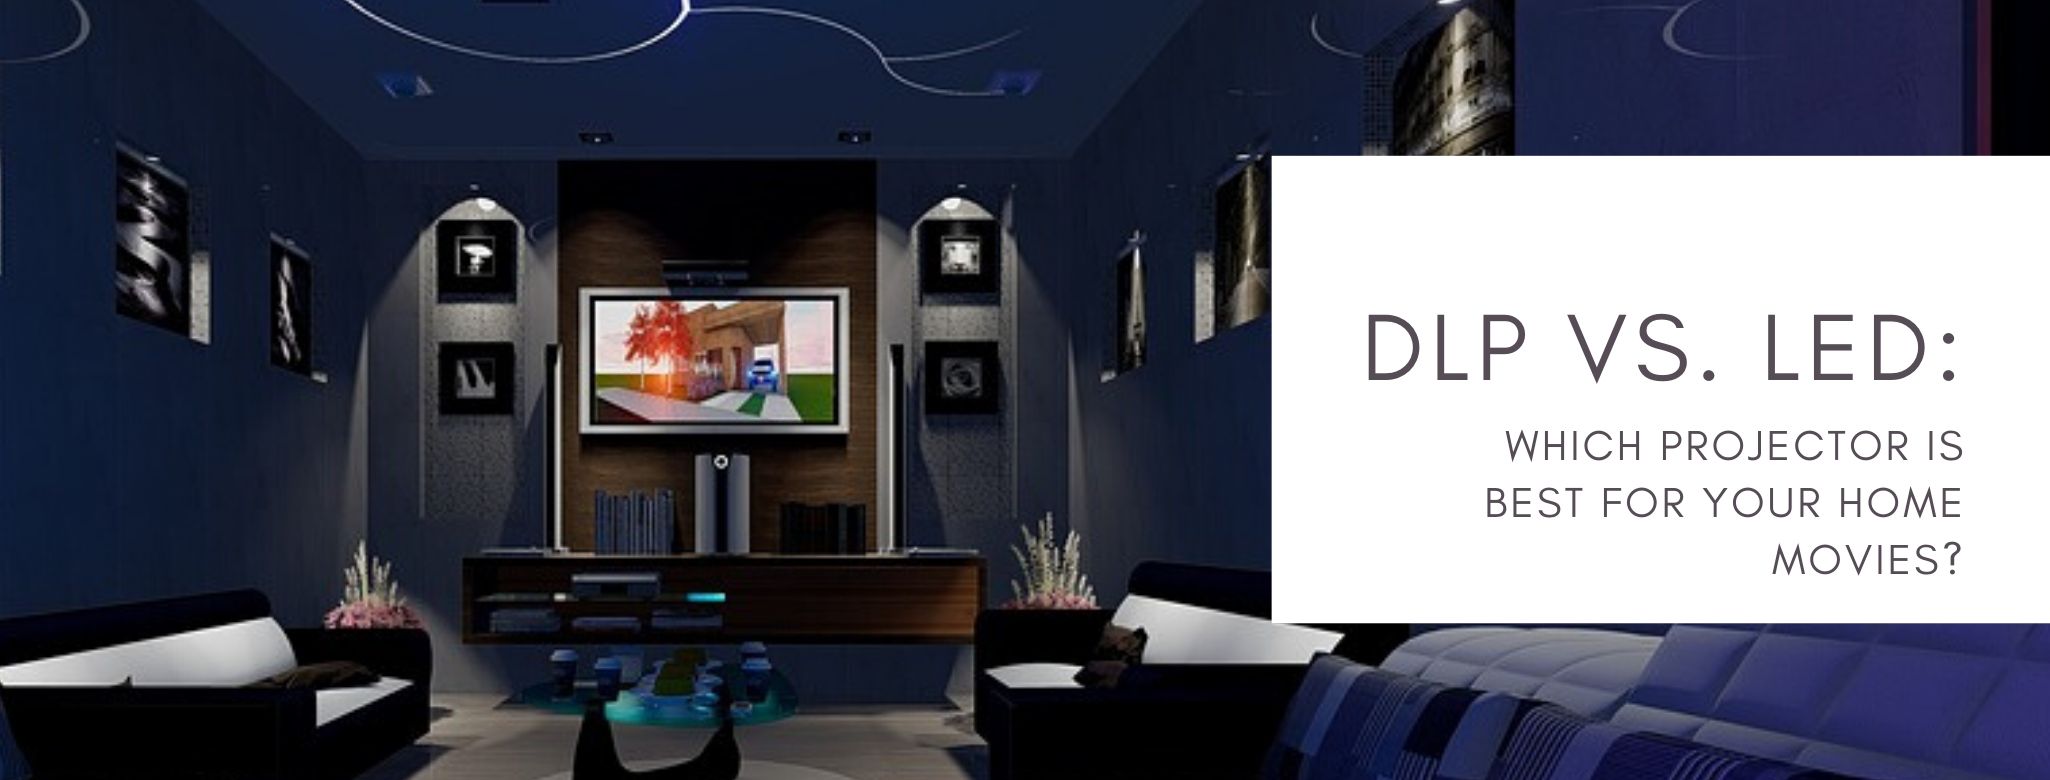 Effektivitet tricky entusiastisk DLP VS LED: Which Projector Is Best For Your Home Movies? | Goodee Sto